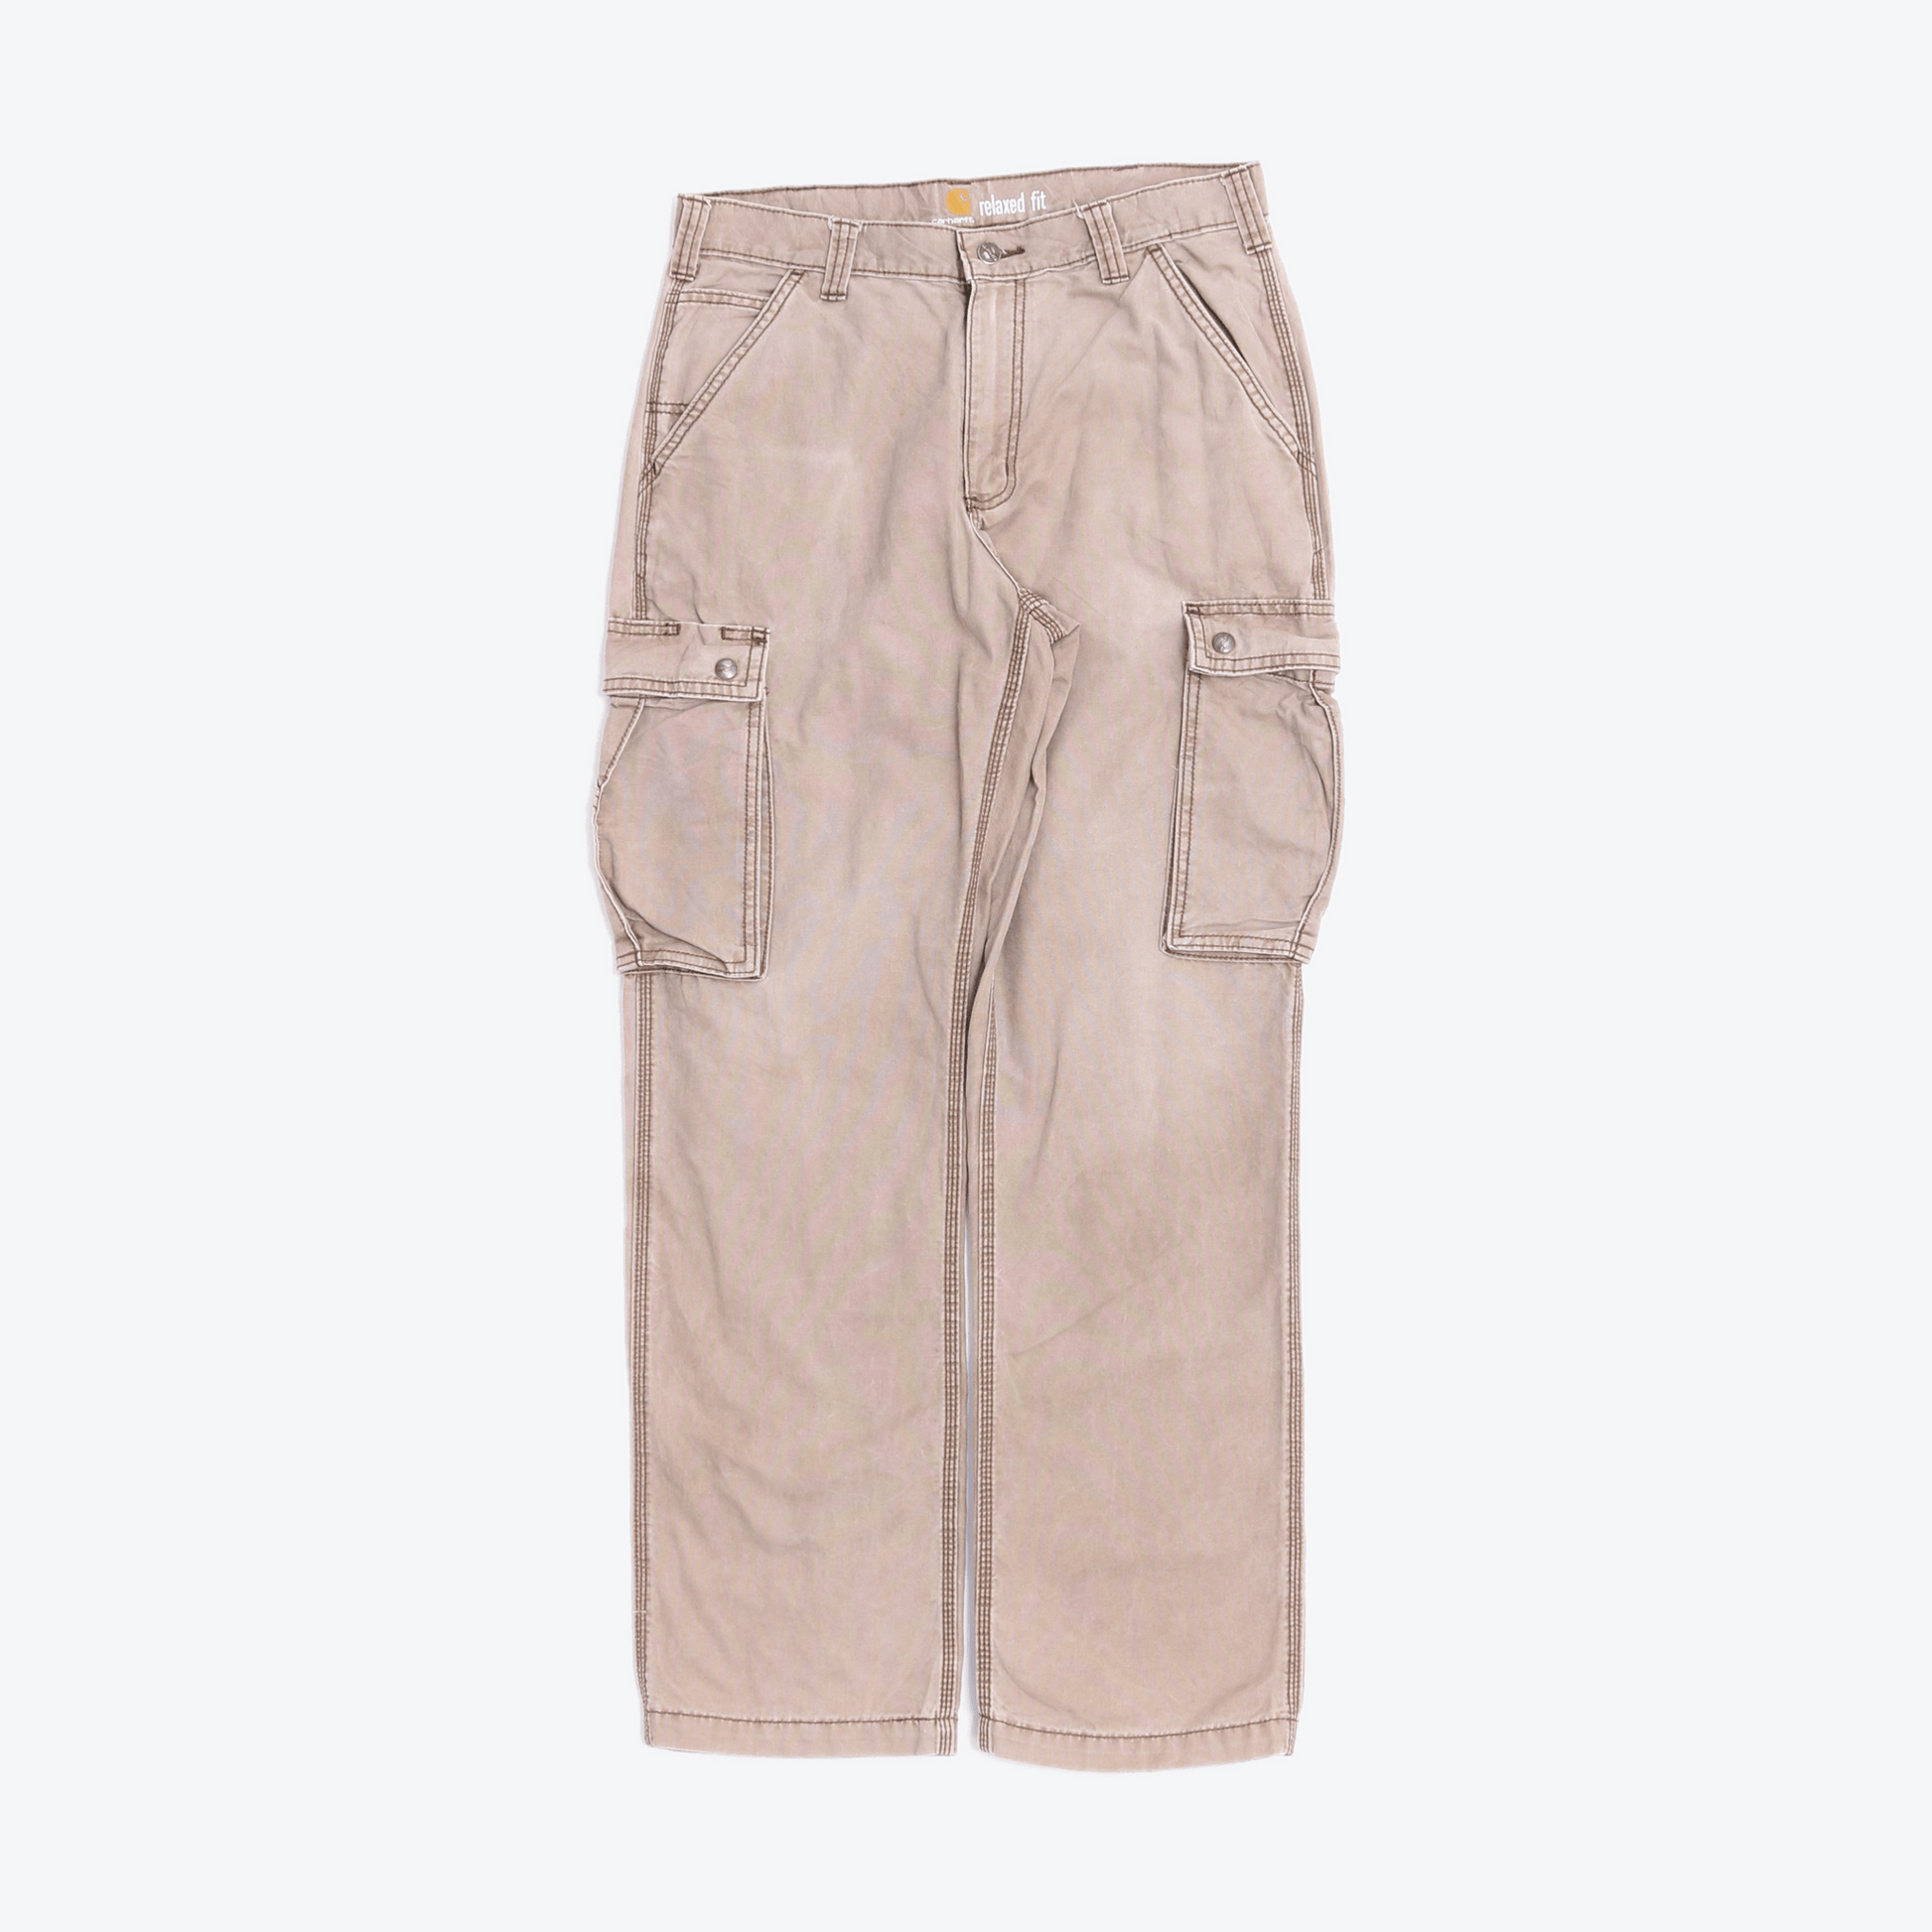 Vintage Cargo Pants - Grey - 33/32 - American Madness